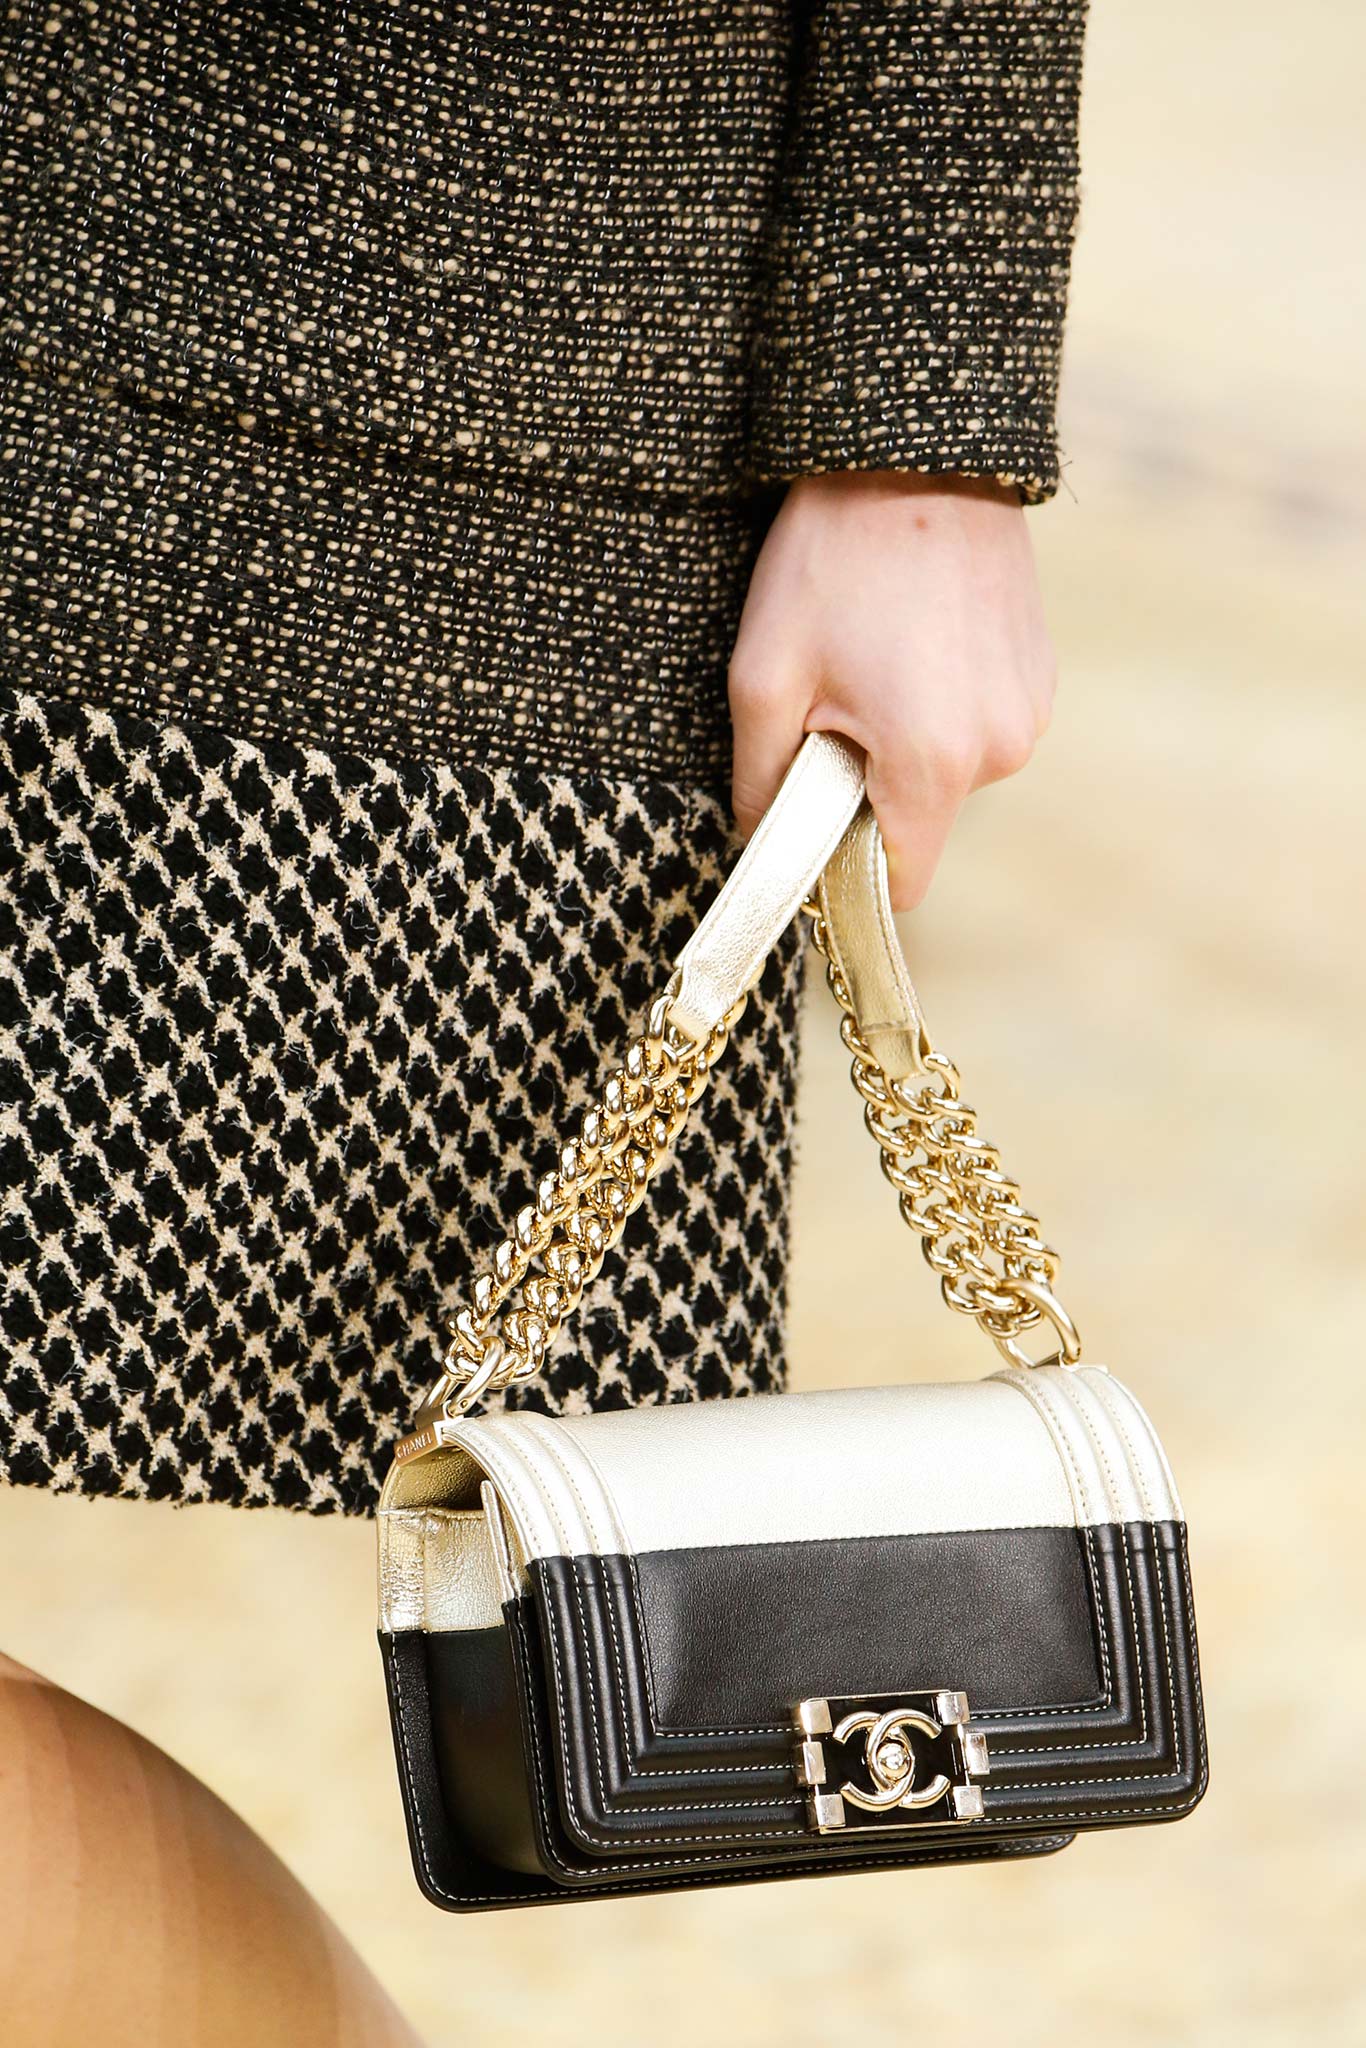 Chanel Fall/Winter 2015 Runway Bag Collection featuring the Brasserie ...